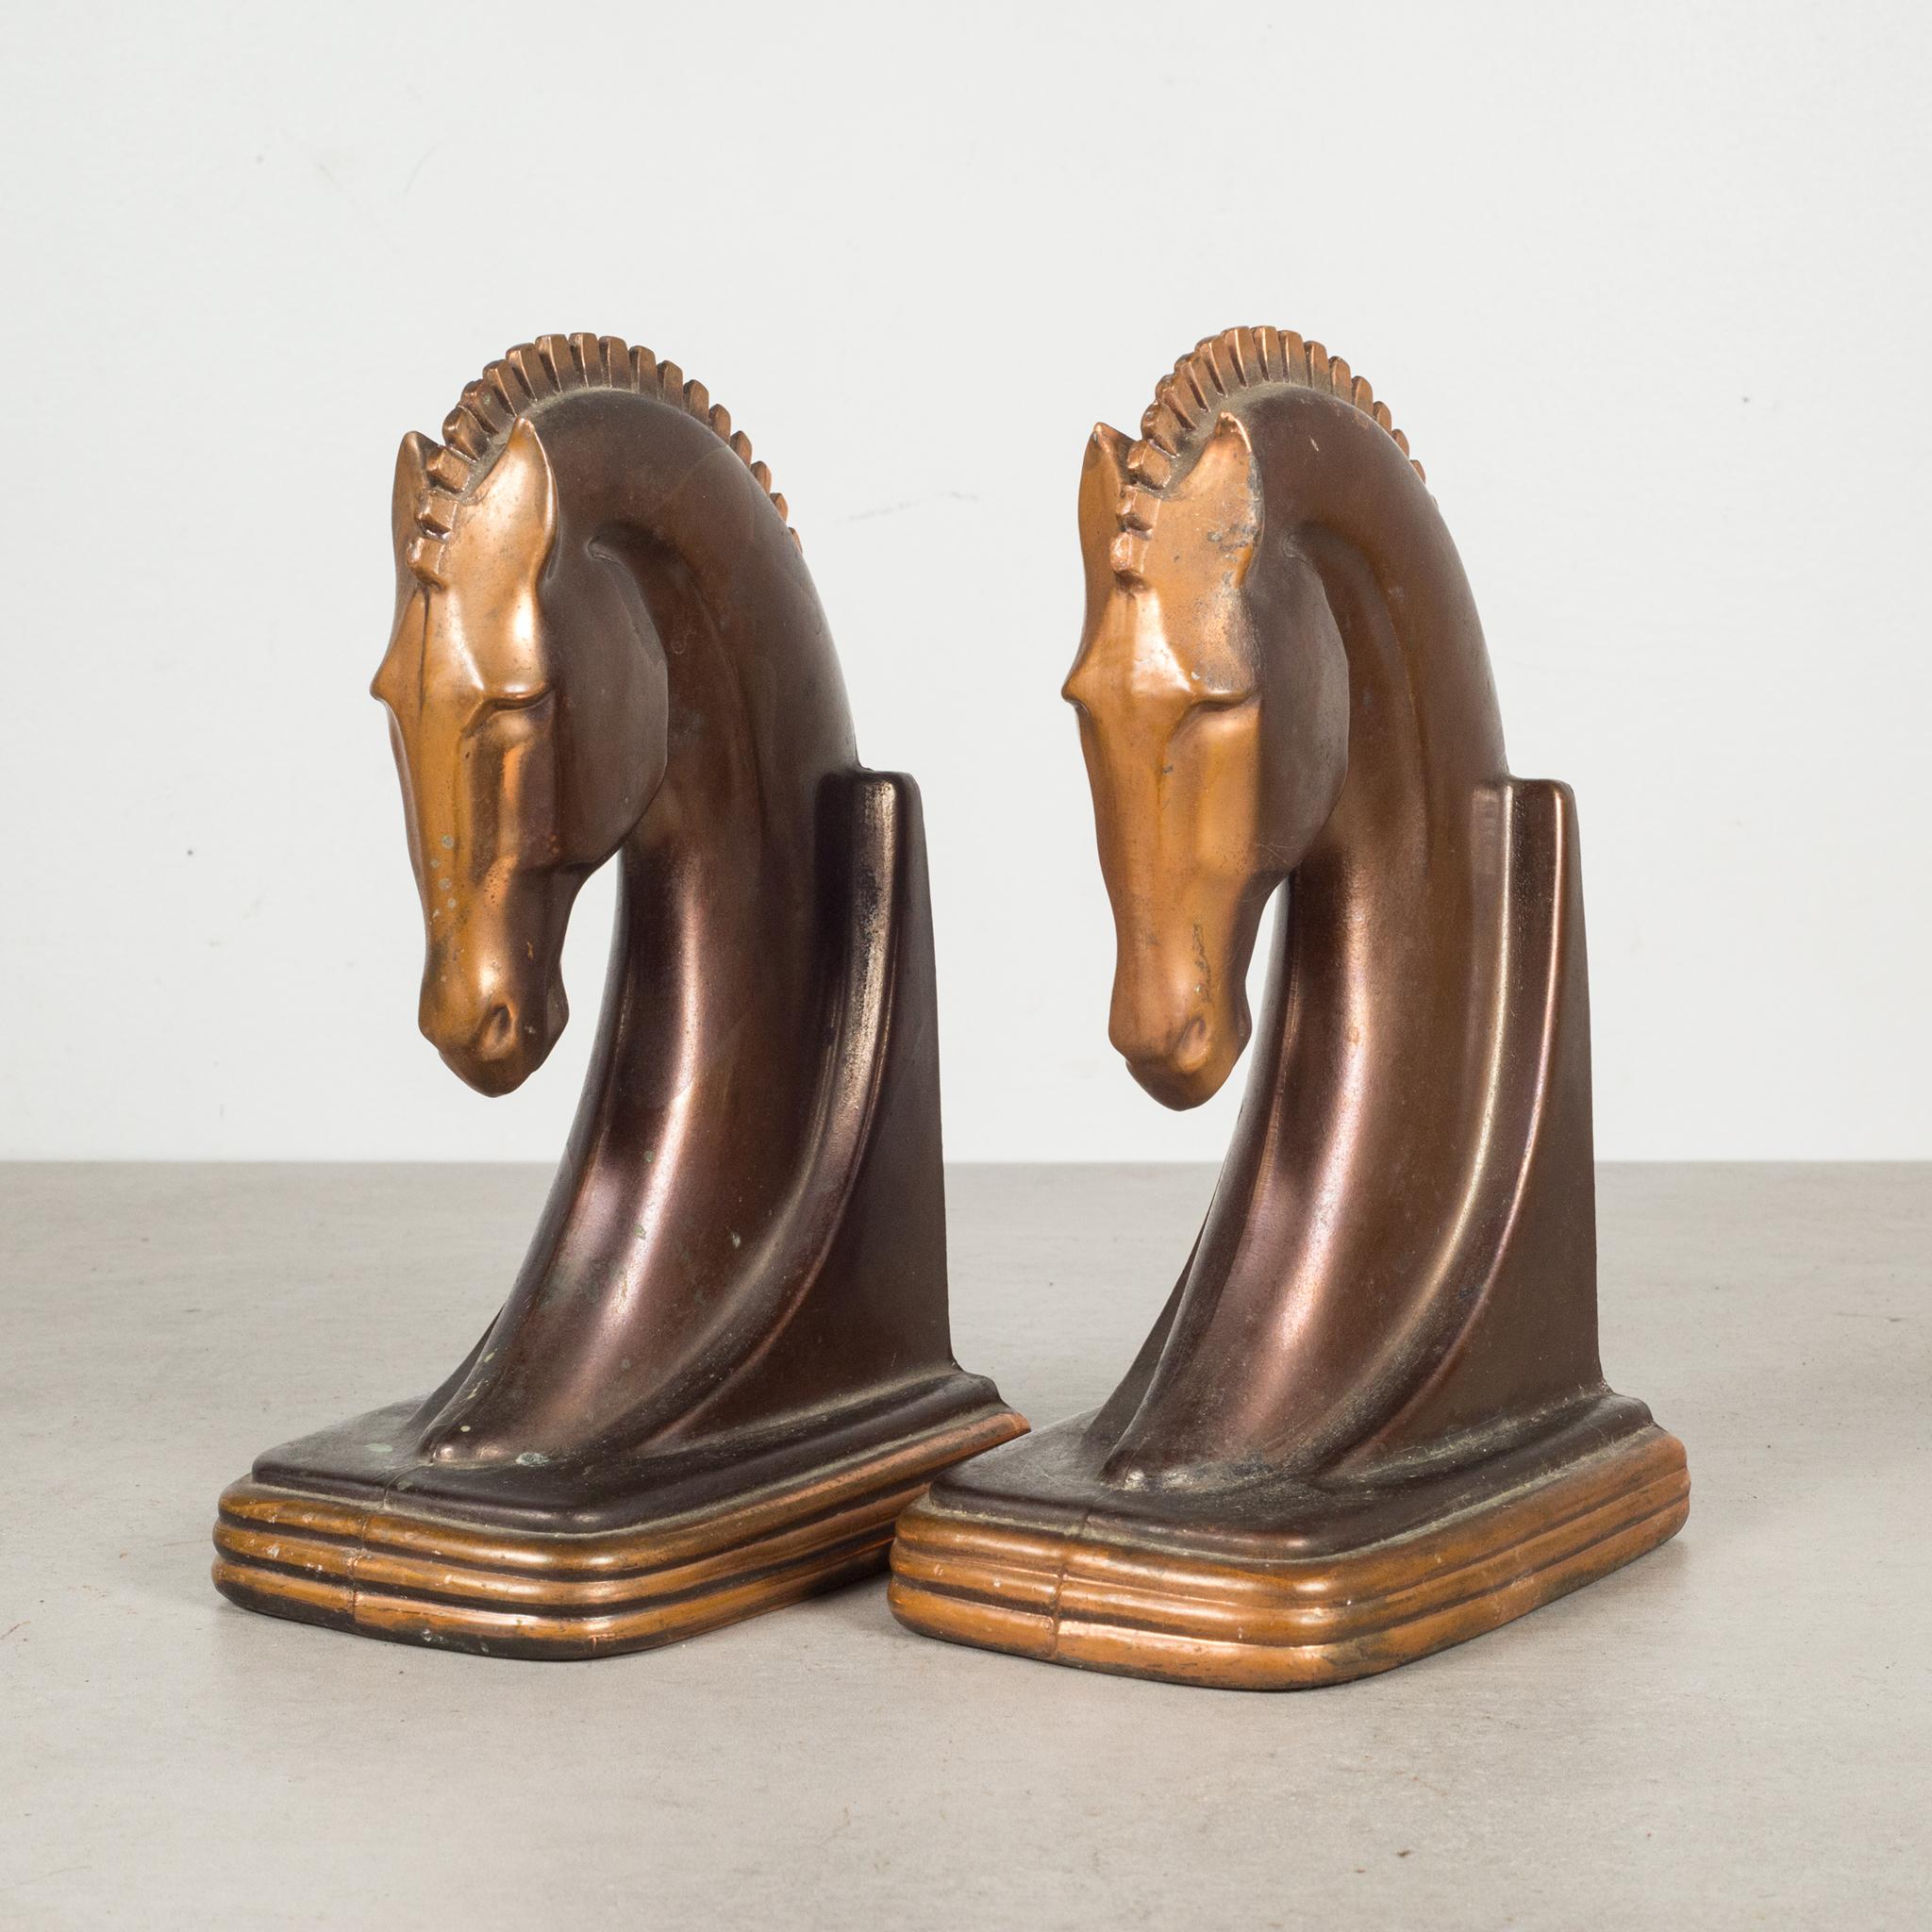 About

An original pair of Art Deco cast metal Trojan horse bookends manufactured by Dodge Trophy Inc. Los Angeles California USA. Both pieces have retained their original bronze and copper finish and are in good condition with appropriate patina